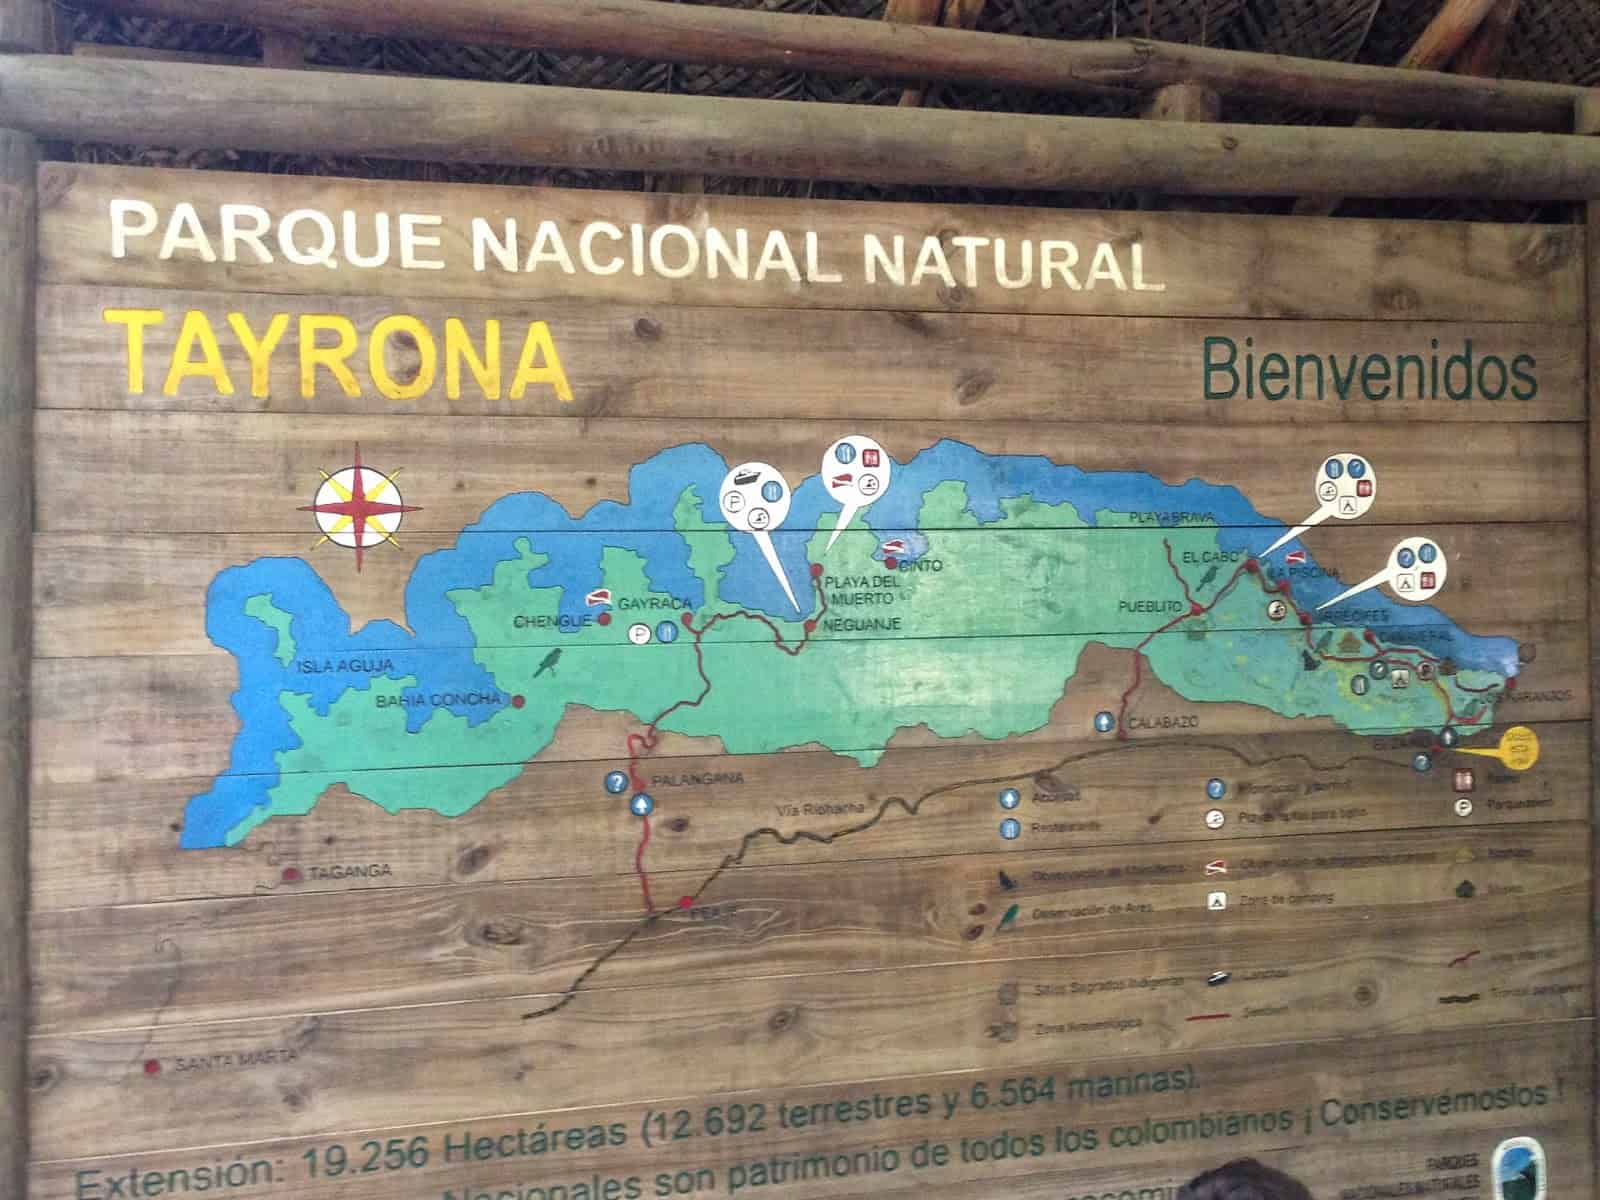 Tayrona National Park entrance in Colombia